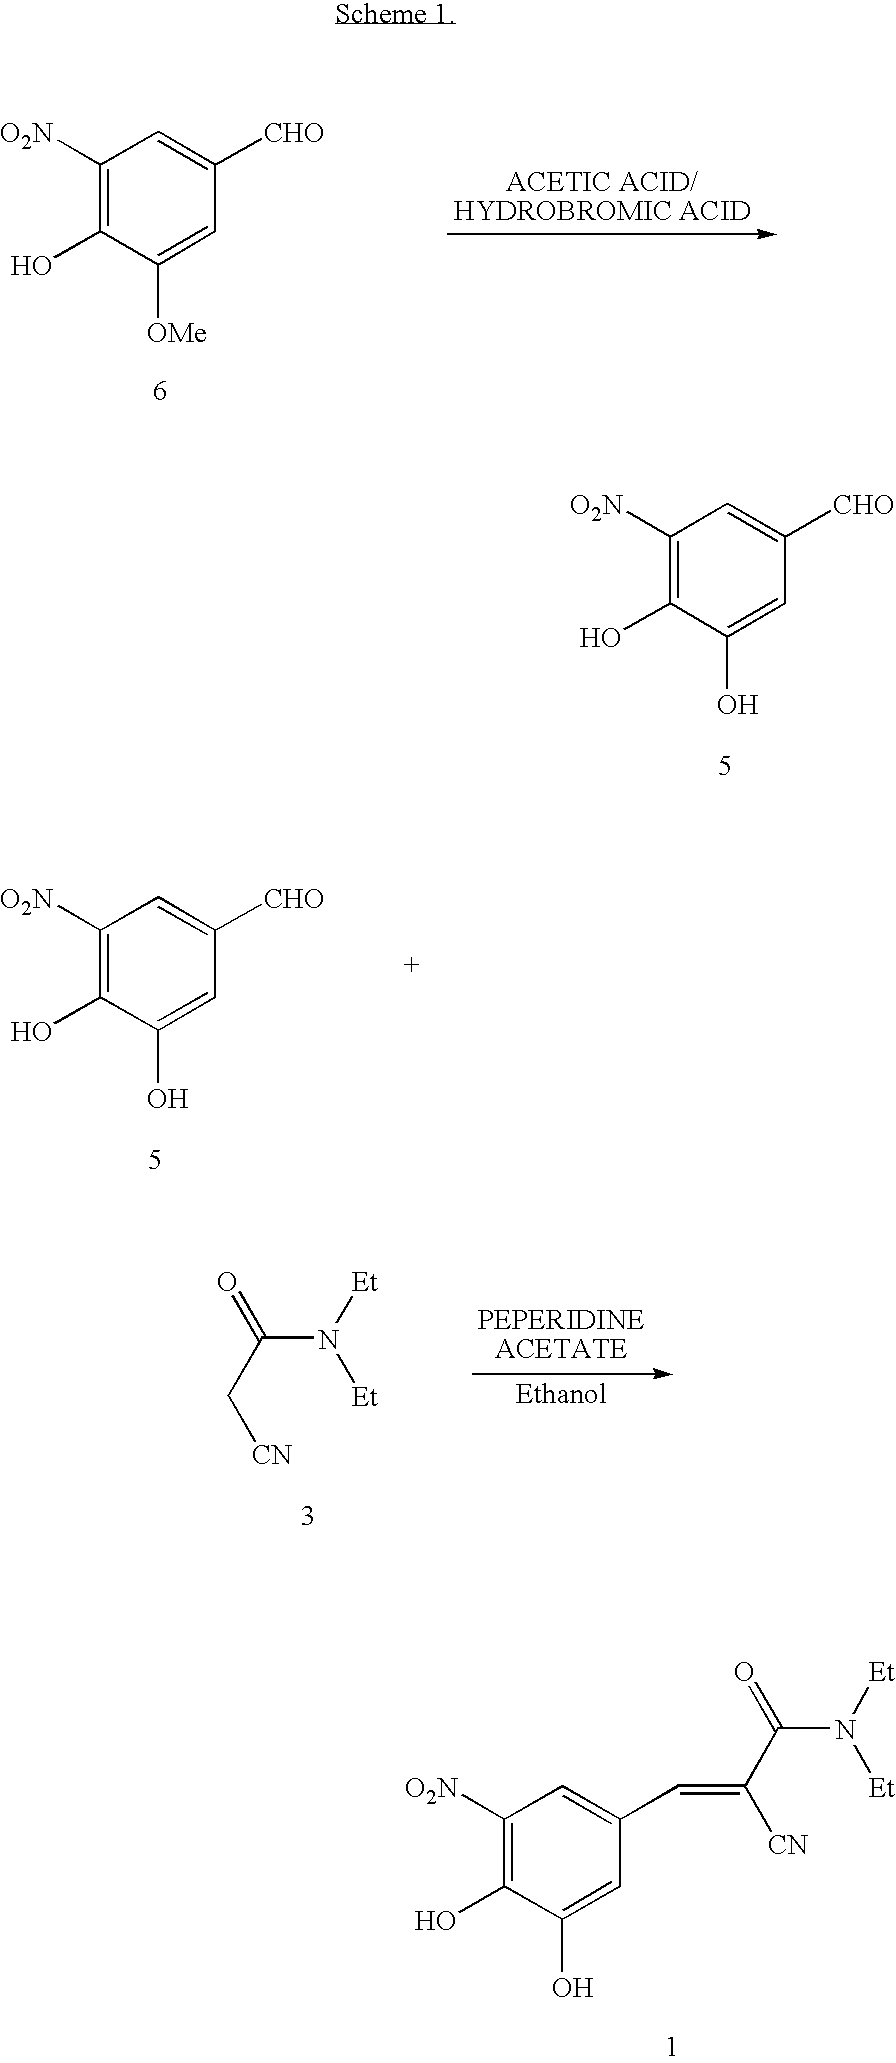 Methods for the preparation of Entacapone